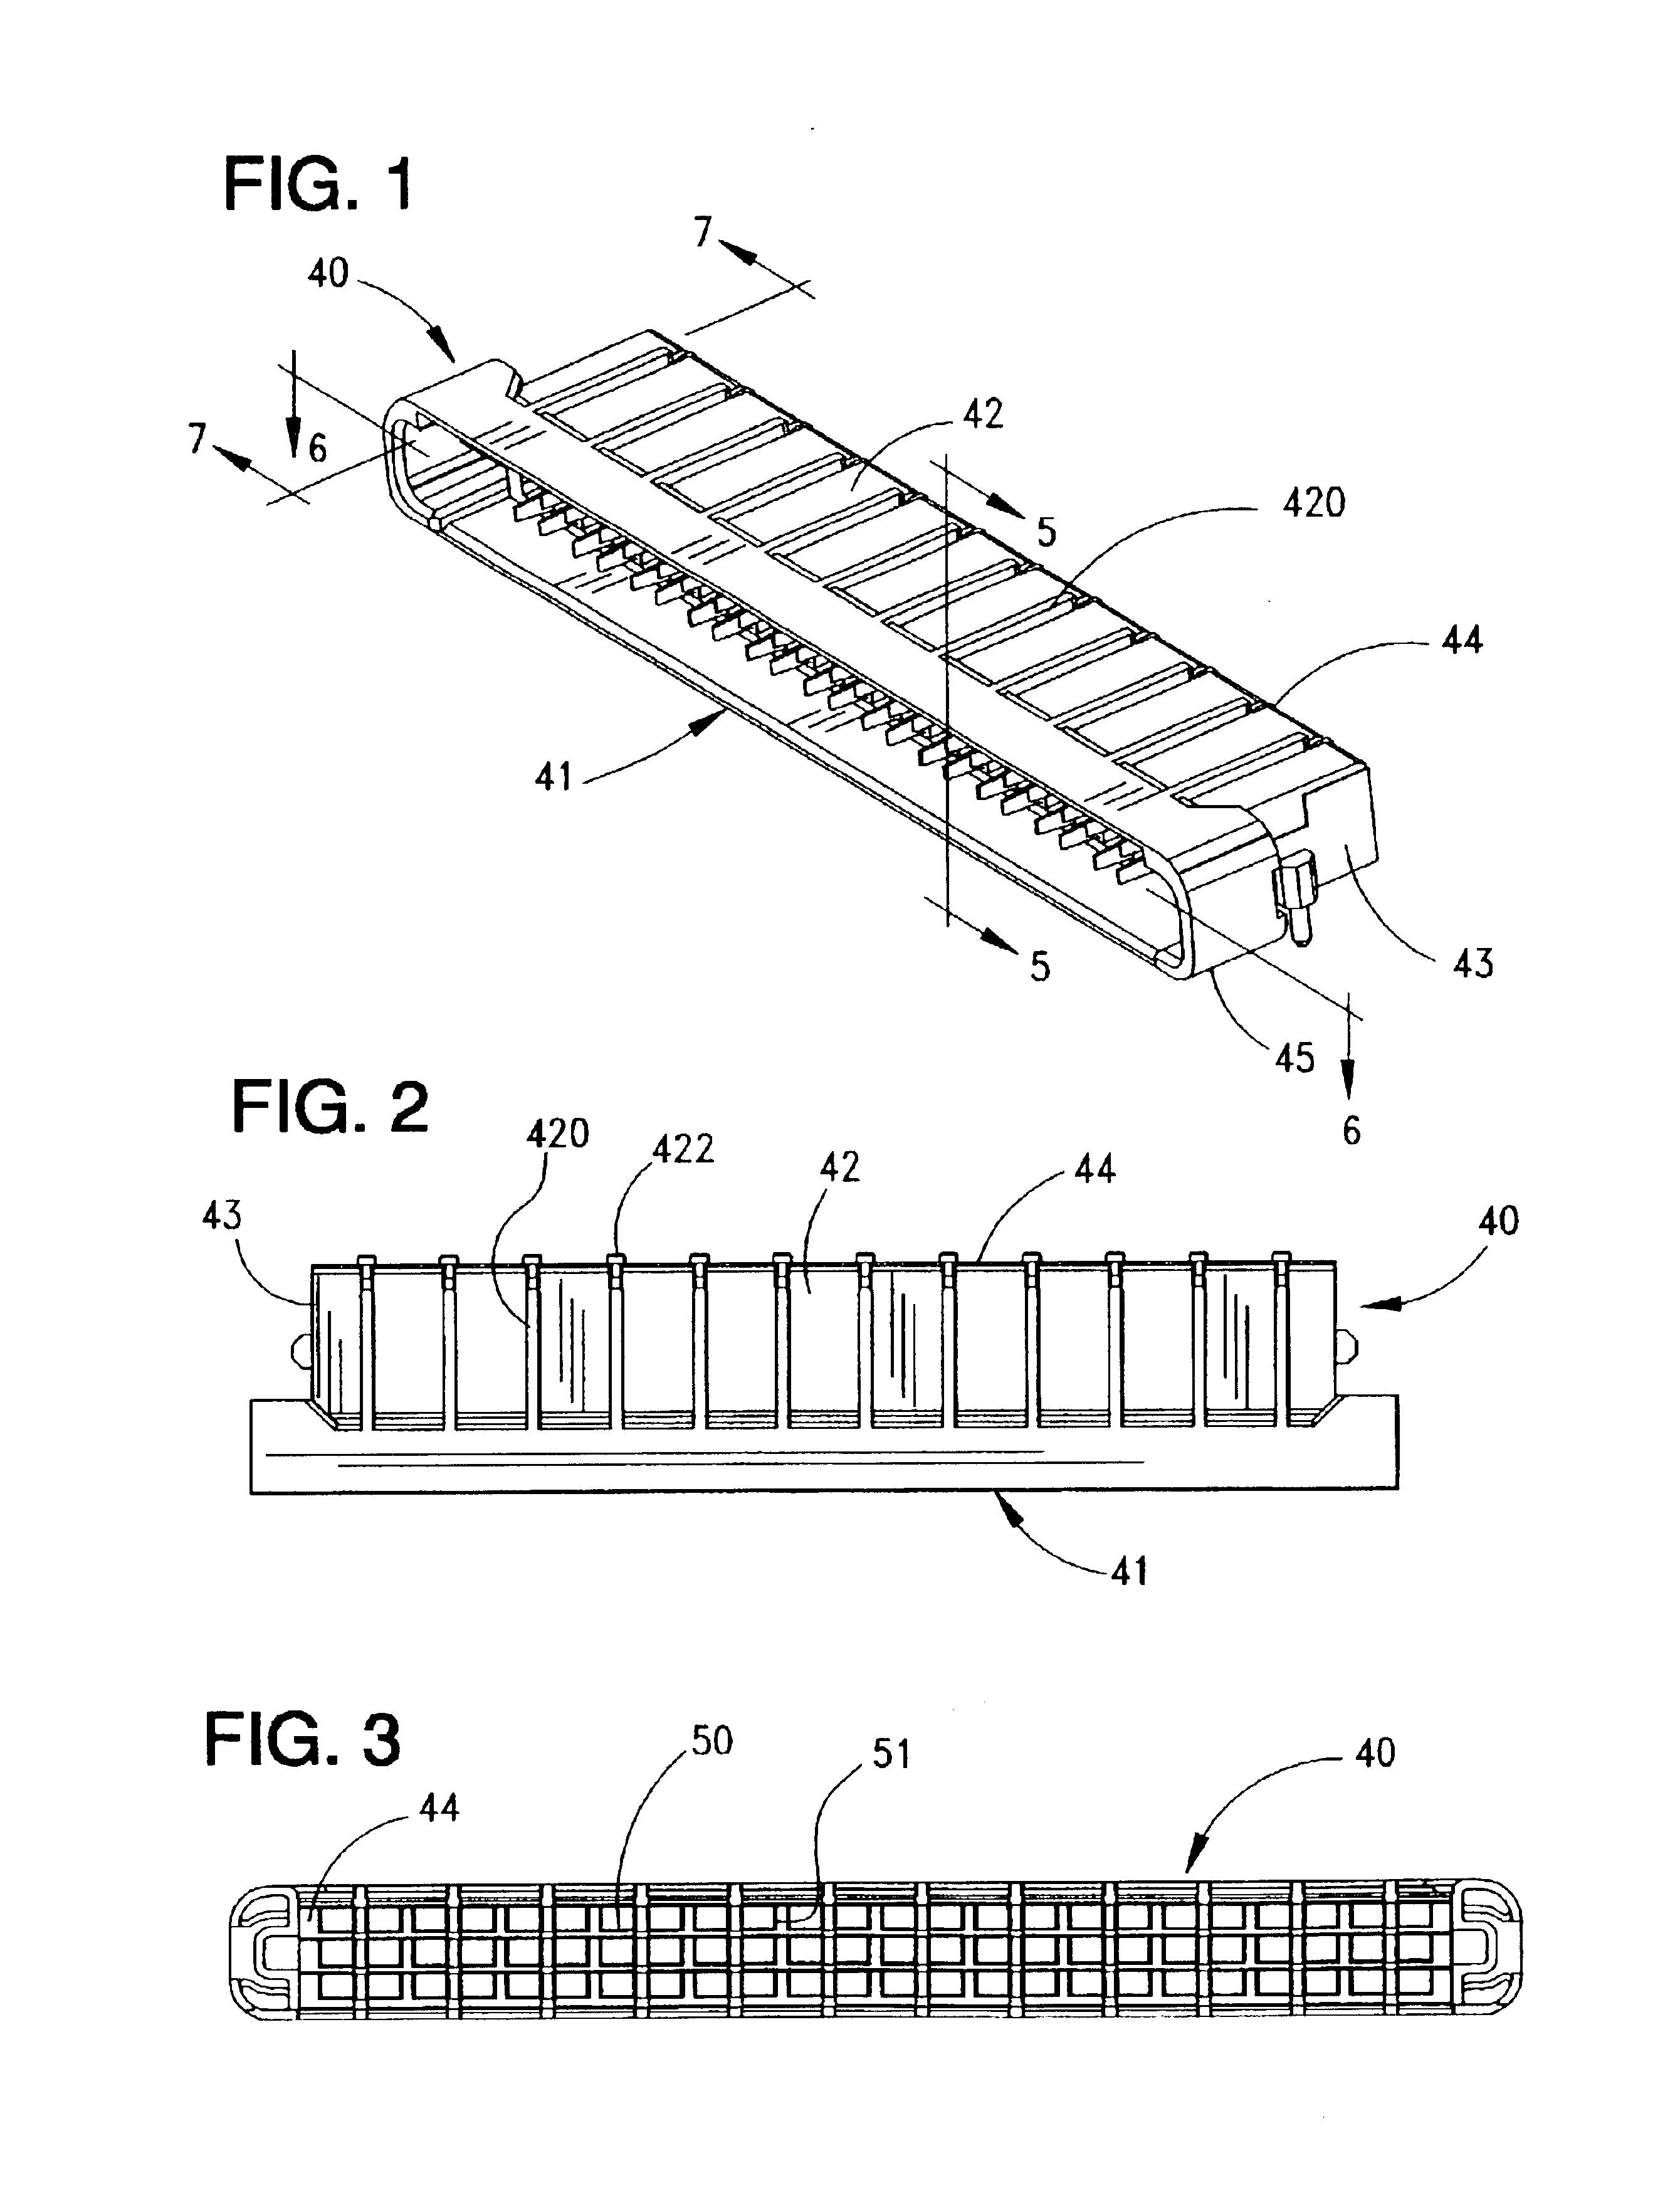 Board-to-board connector with compliant mounting pins